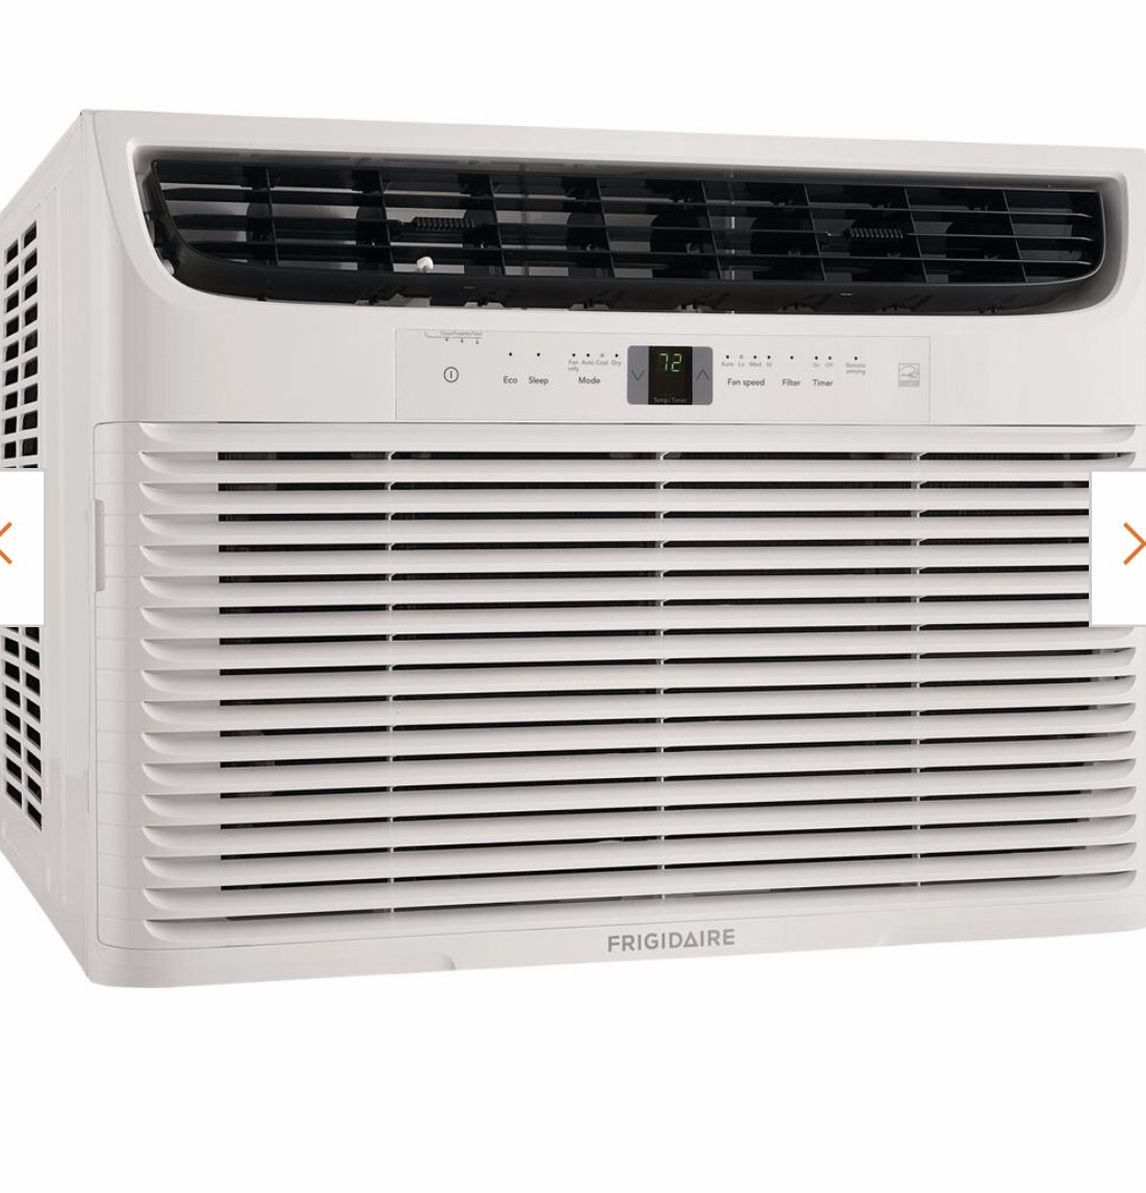 **Brand new In box**25,000 BTU 230-Volt Window-Mounted Heavy-Duty Air Conditioner with Temperature Sensing Remote Control by Frigidaire